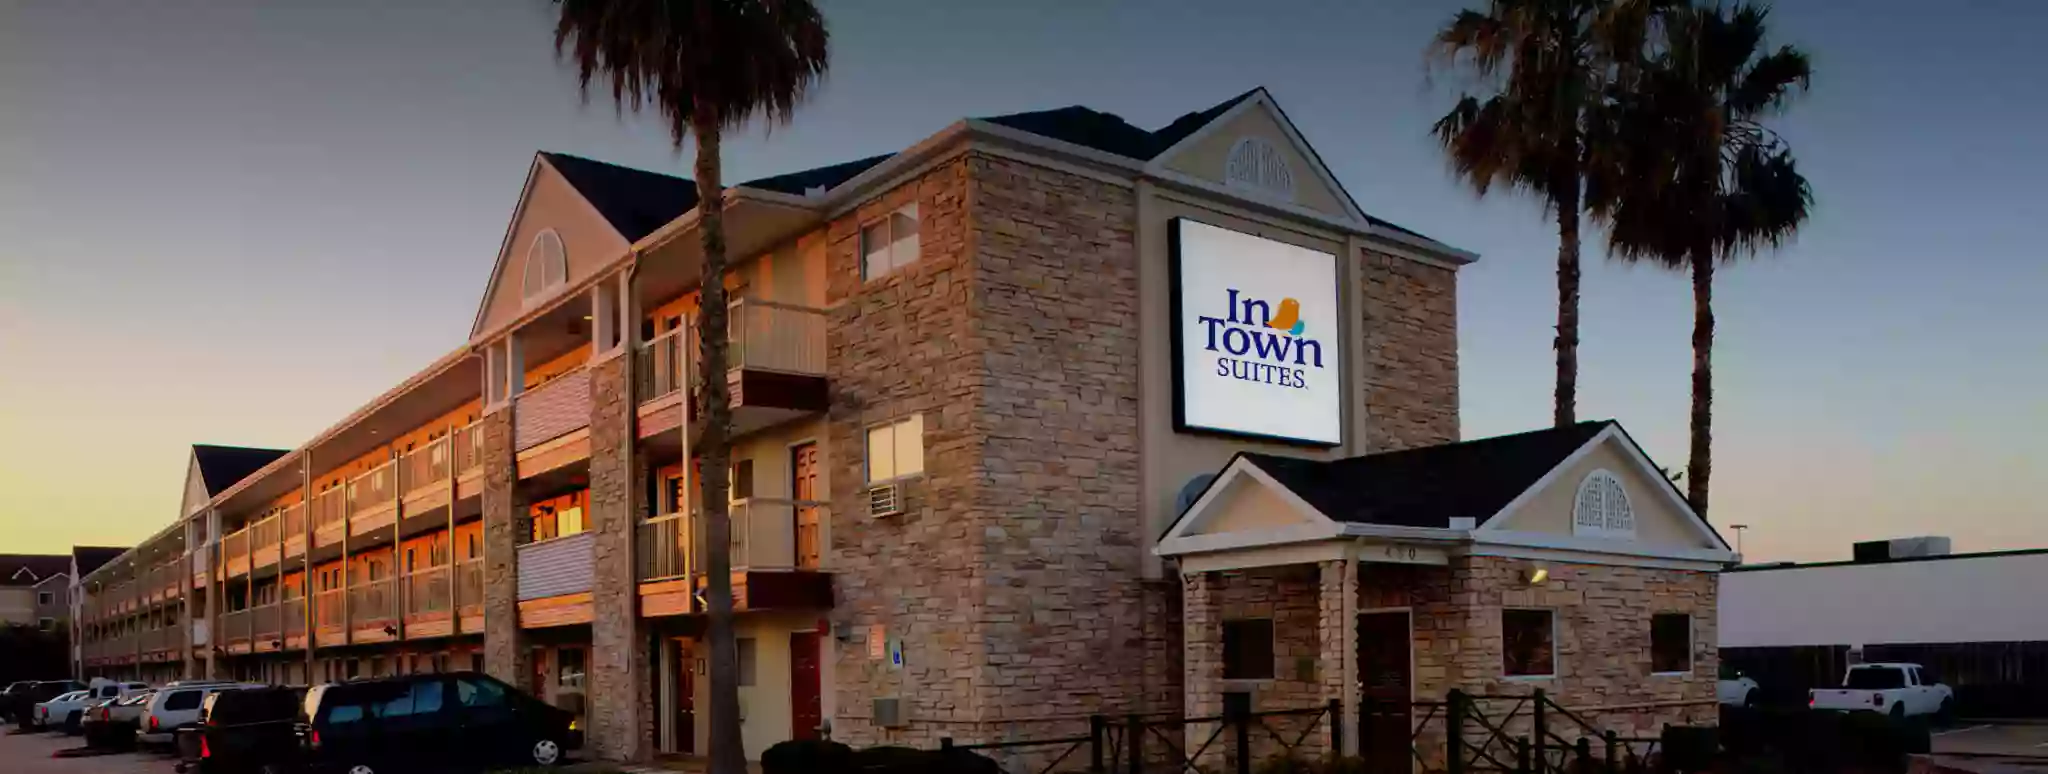 InTown Suites Extended Stay Fort Lauderdale FL